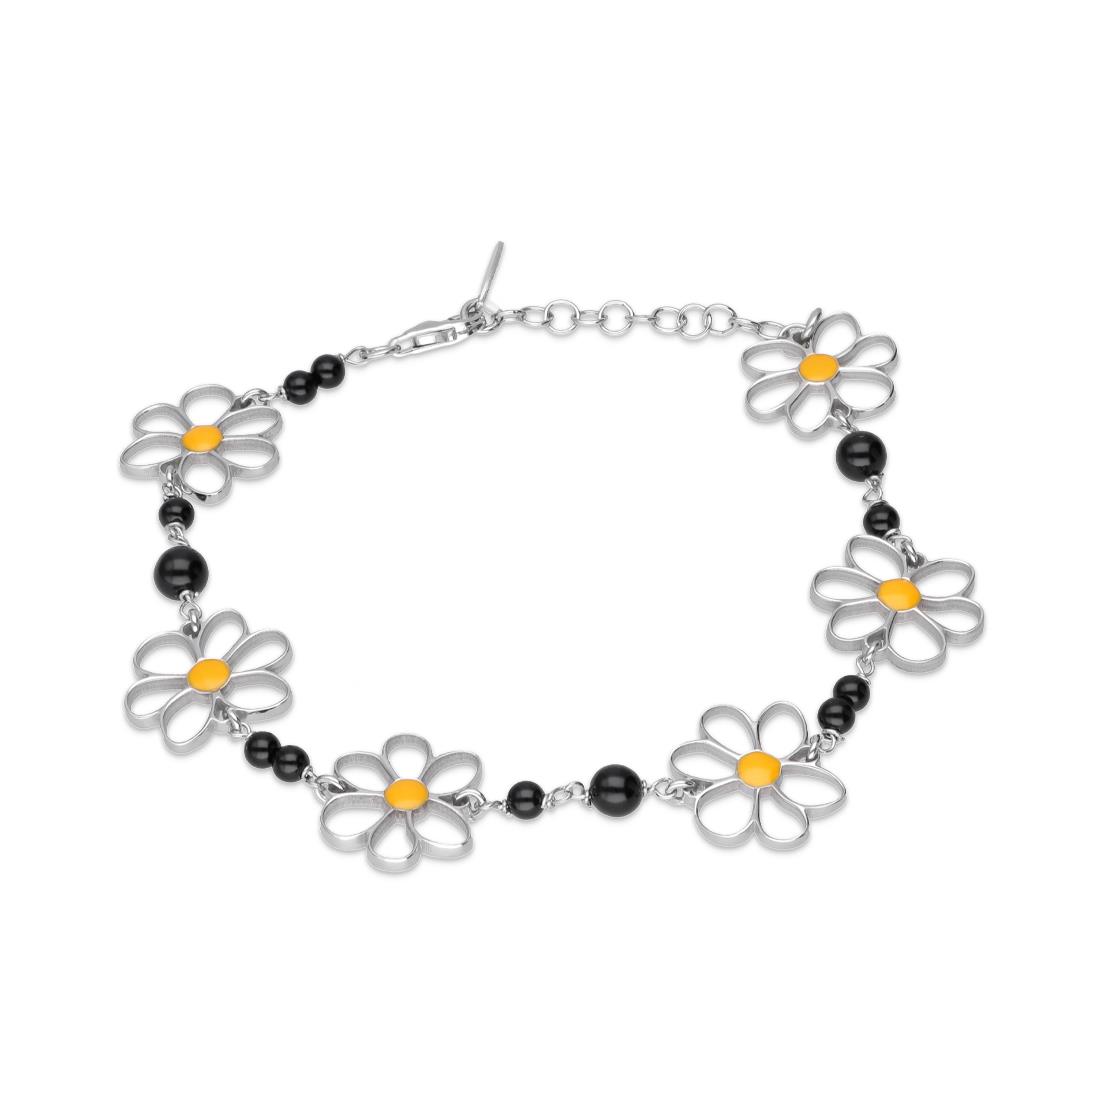 Silver bracelet with empty daisy petals and beads - GURU